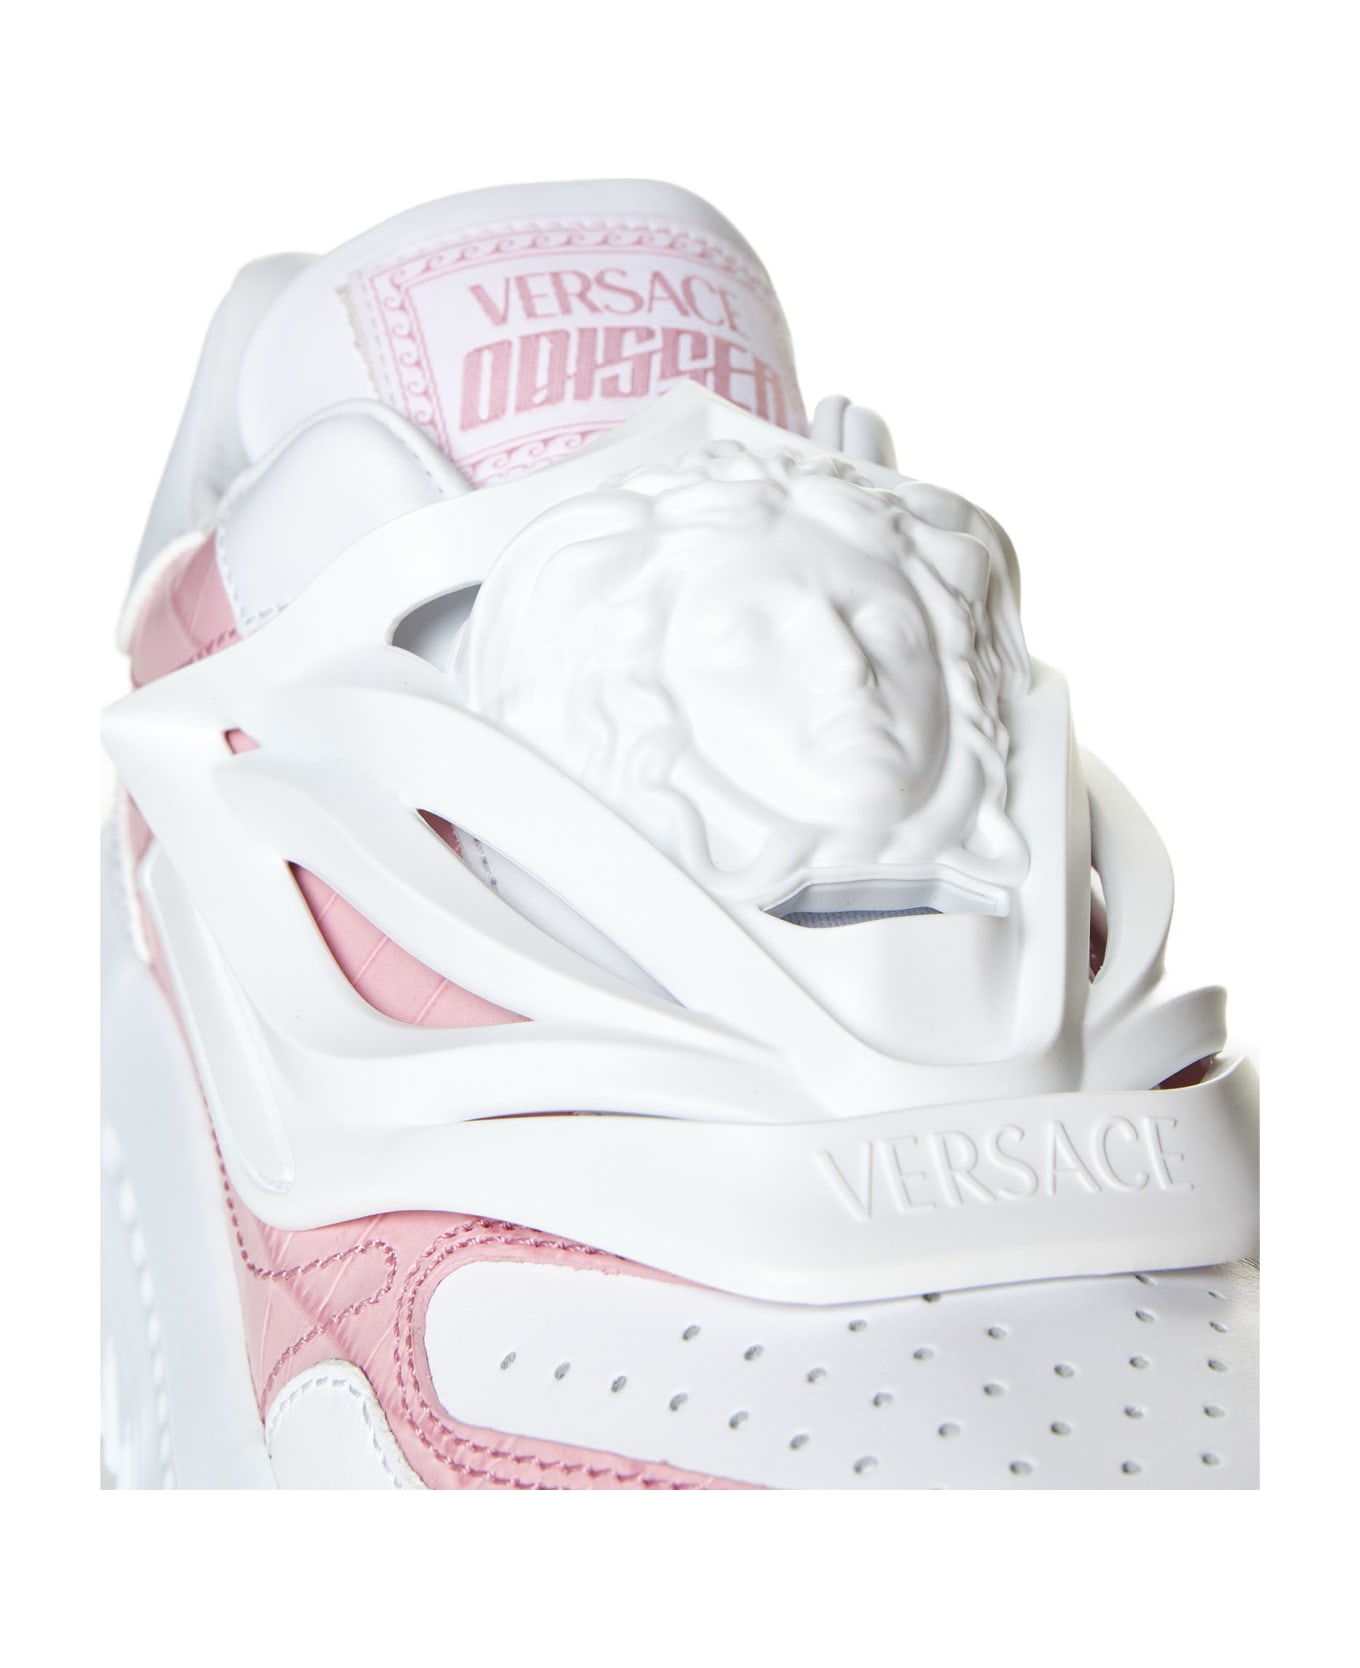 Versace 'odissea' Sneakers - White+english rose